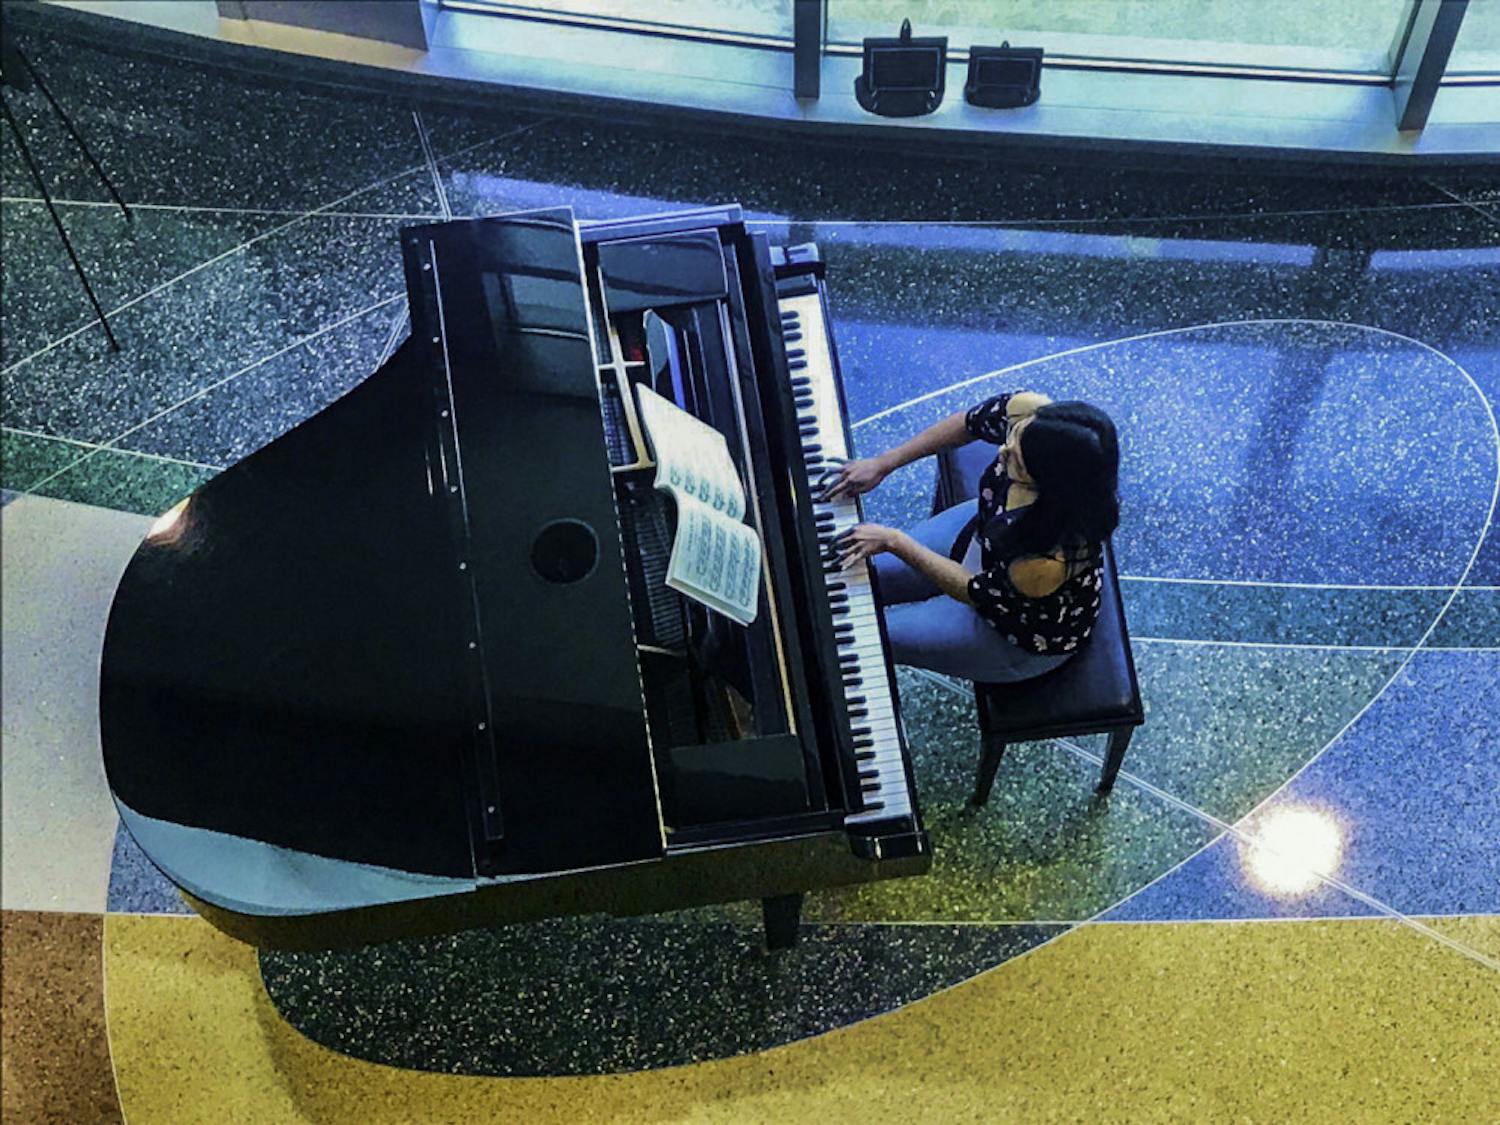 UF’s International Piano Festival participant Ahui plays classical music at UF Health Shands Hospital.